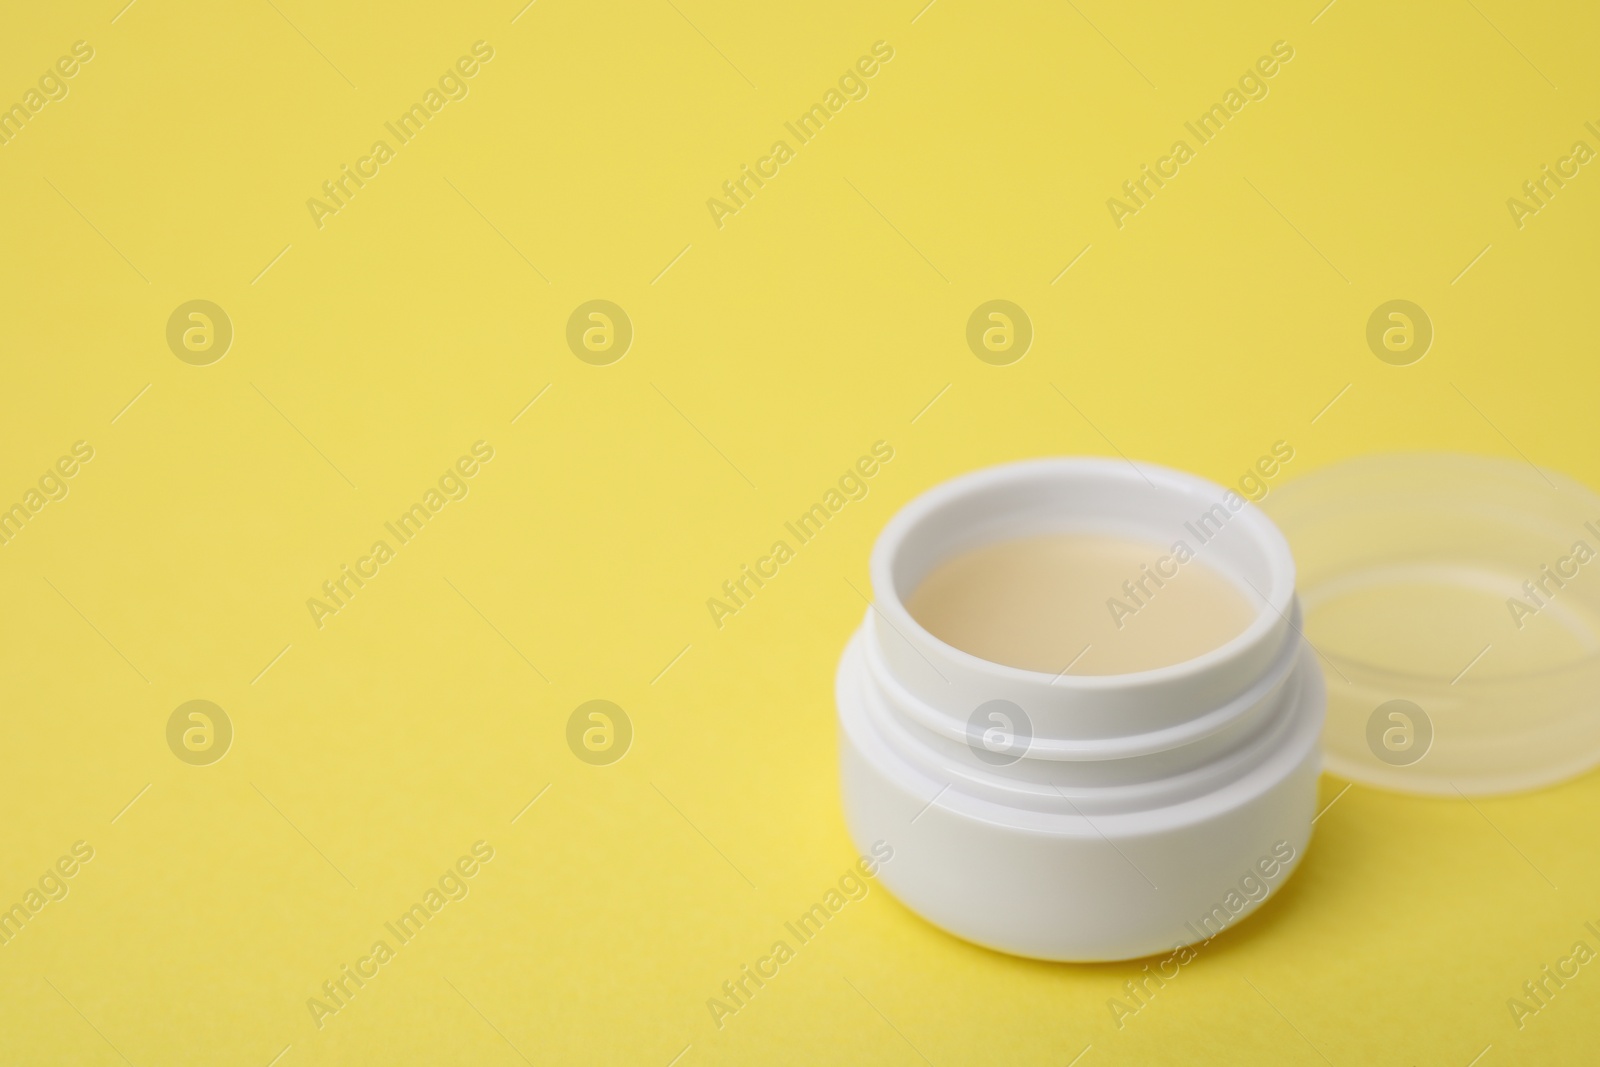 Photo of Jar of petroleum jelly on yellow background, space for text